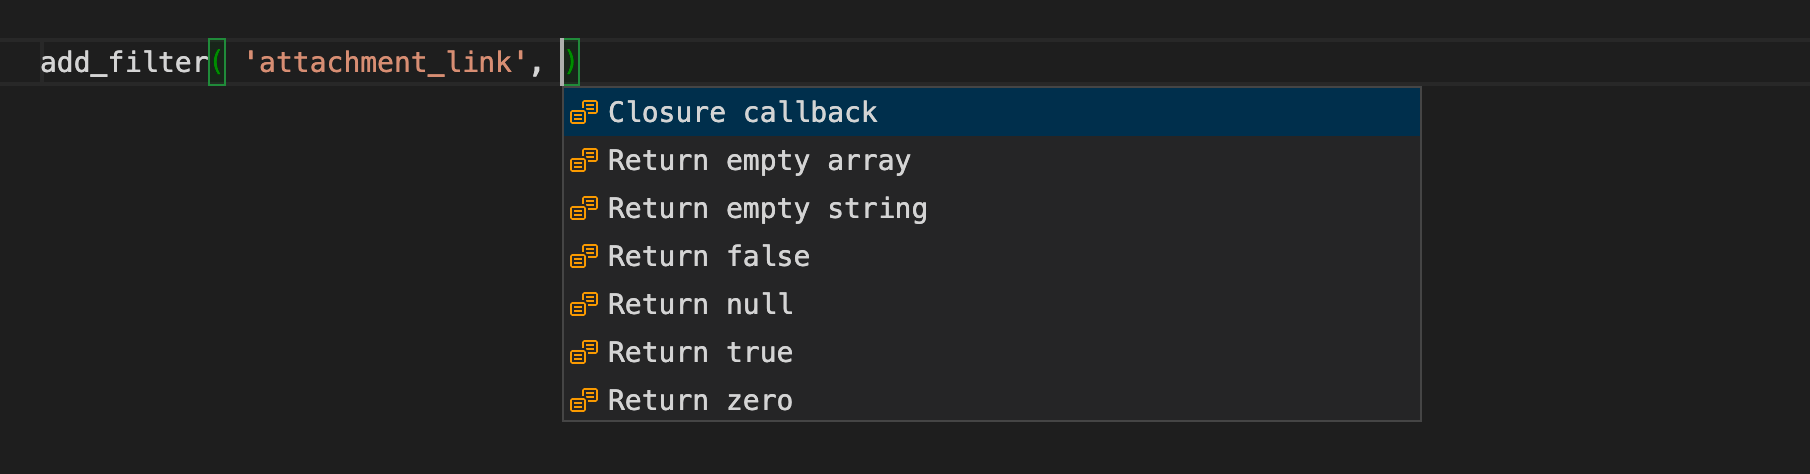 Screenshot of VS Code showing an autocomplete list for the callback parameter of the add_filter function